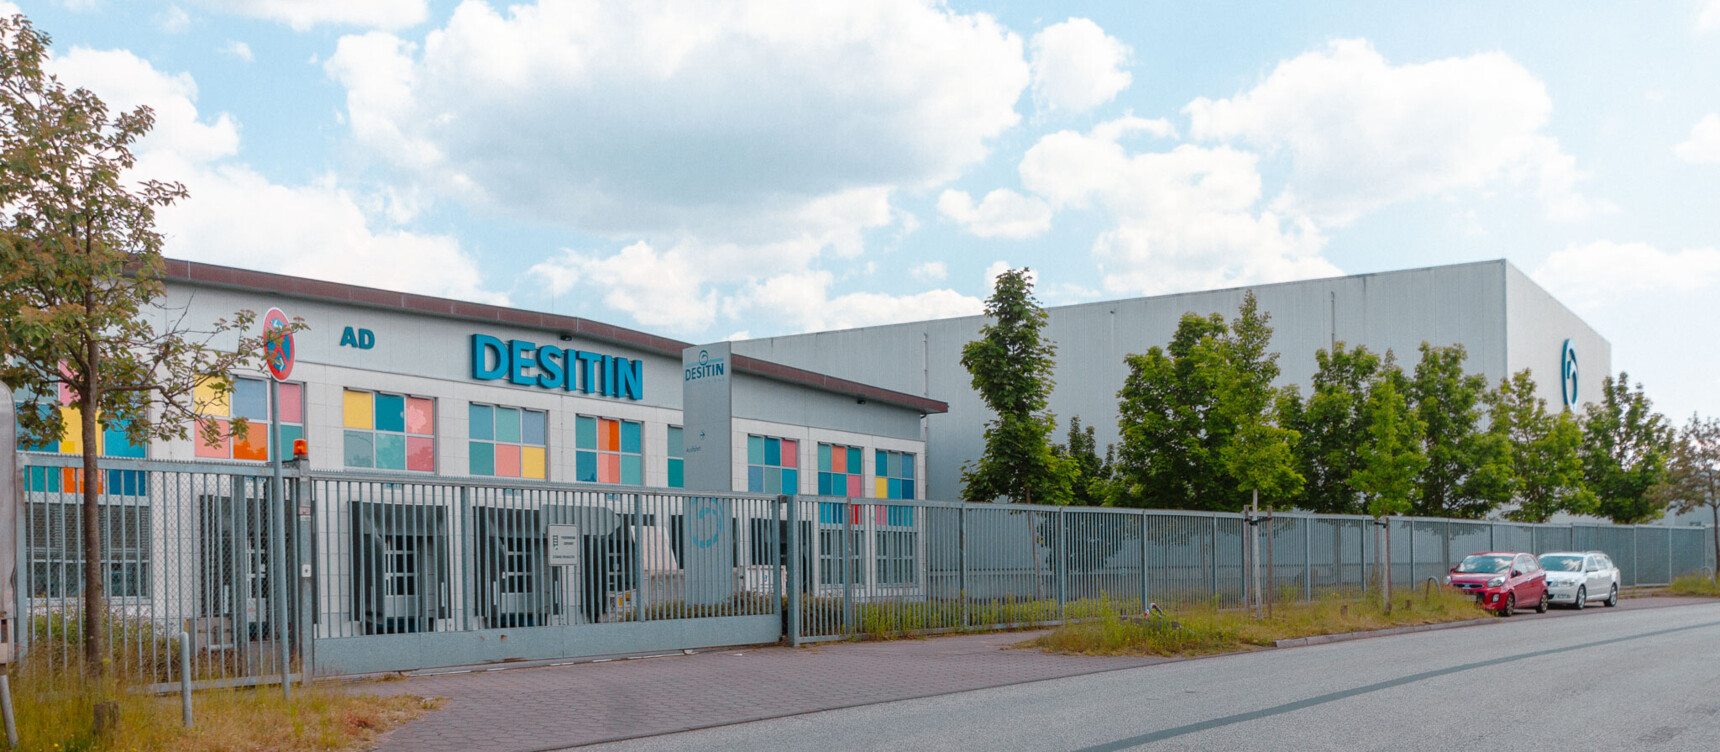 Desitin Arzneimittel GmbH is based at the location south of the airport environment